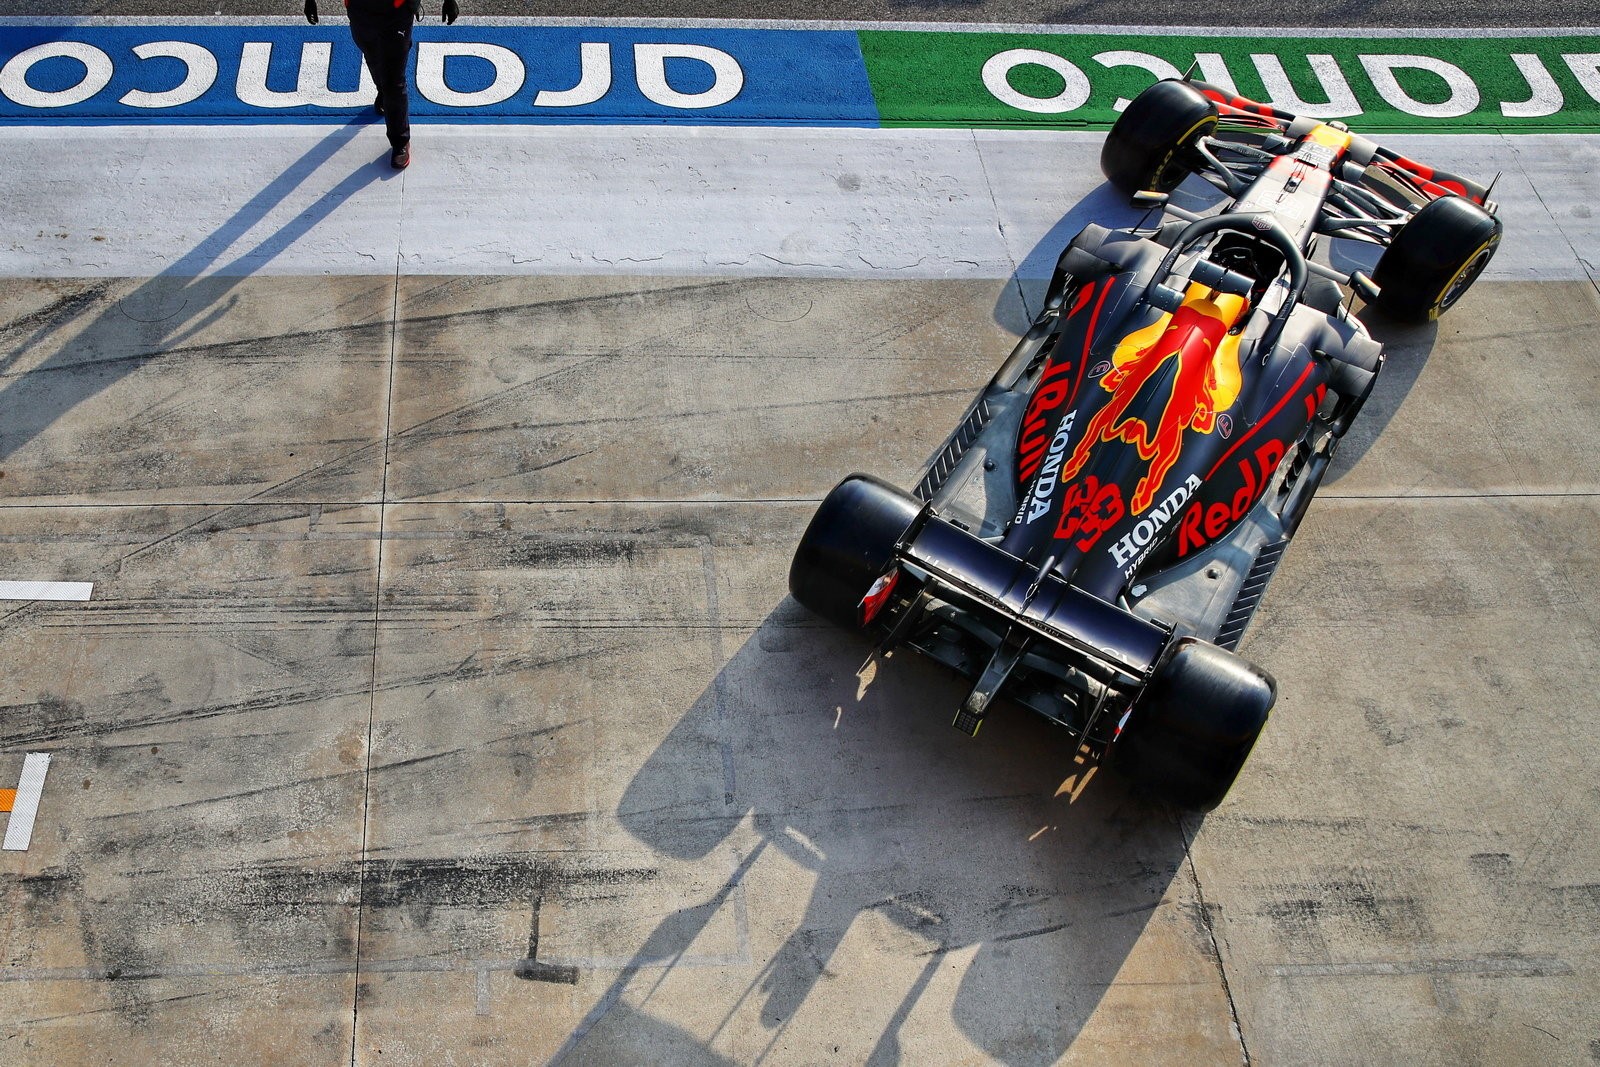 A Red Bull Formula 1 in 2020 at Imola during the qualifying session.